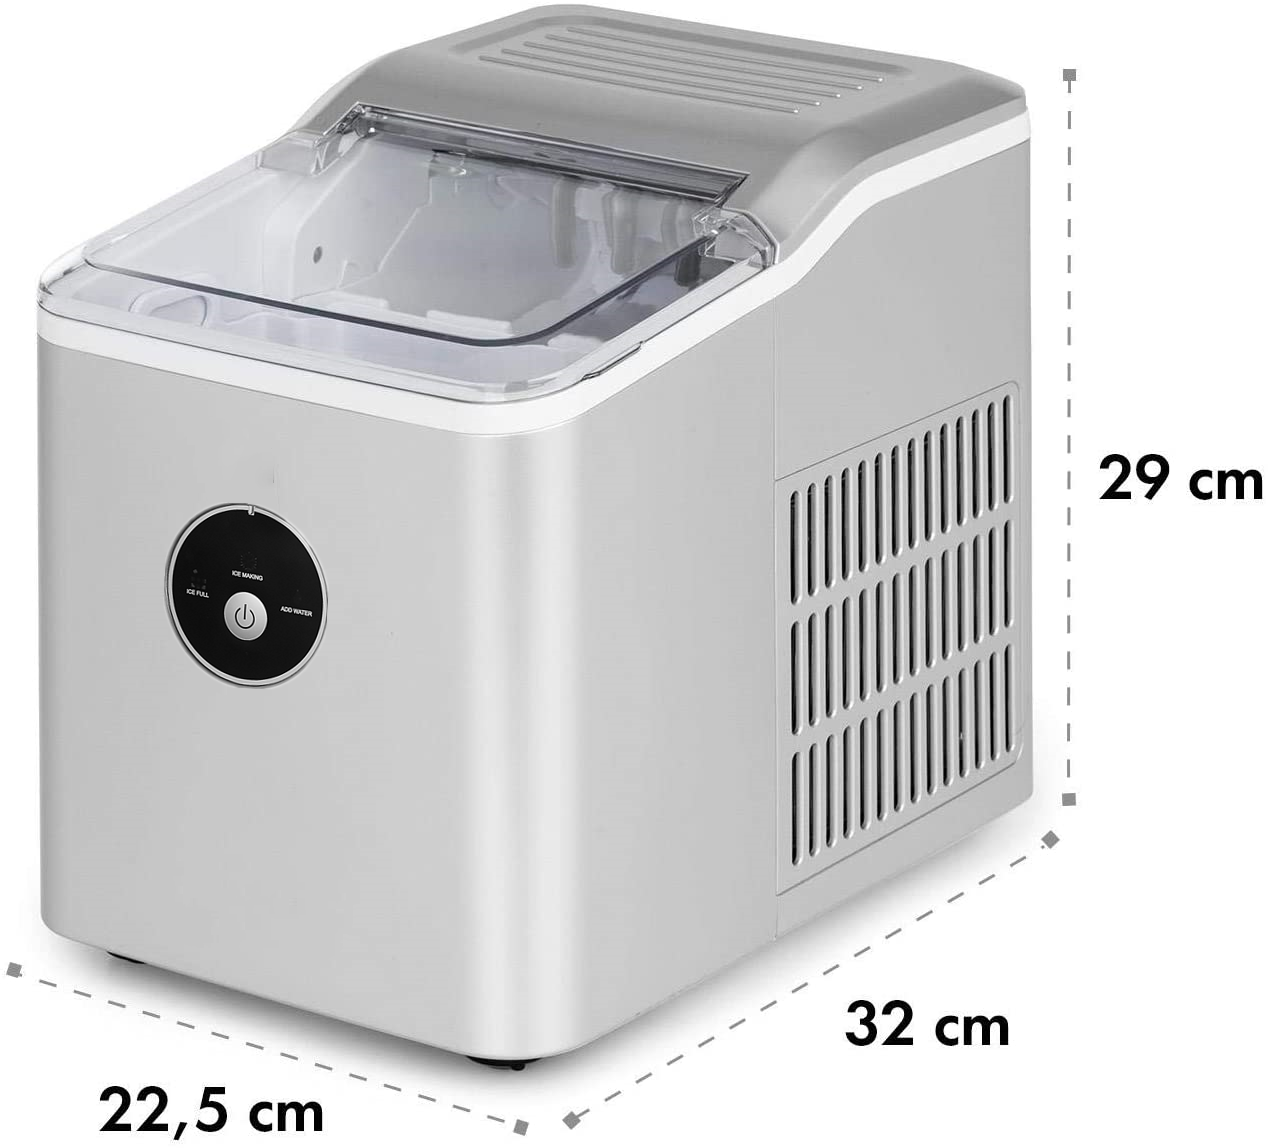 Ice Maker Machine Countertop, 28lbs/24H, 9 Bullet Ice Cubes Ready in 5 Mins, Portable Ice Maker with Basket and Scoop, for Home/Kitchen/Camping/RV (Silver)